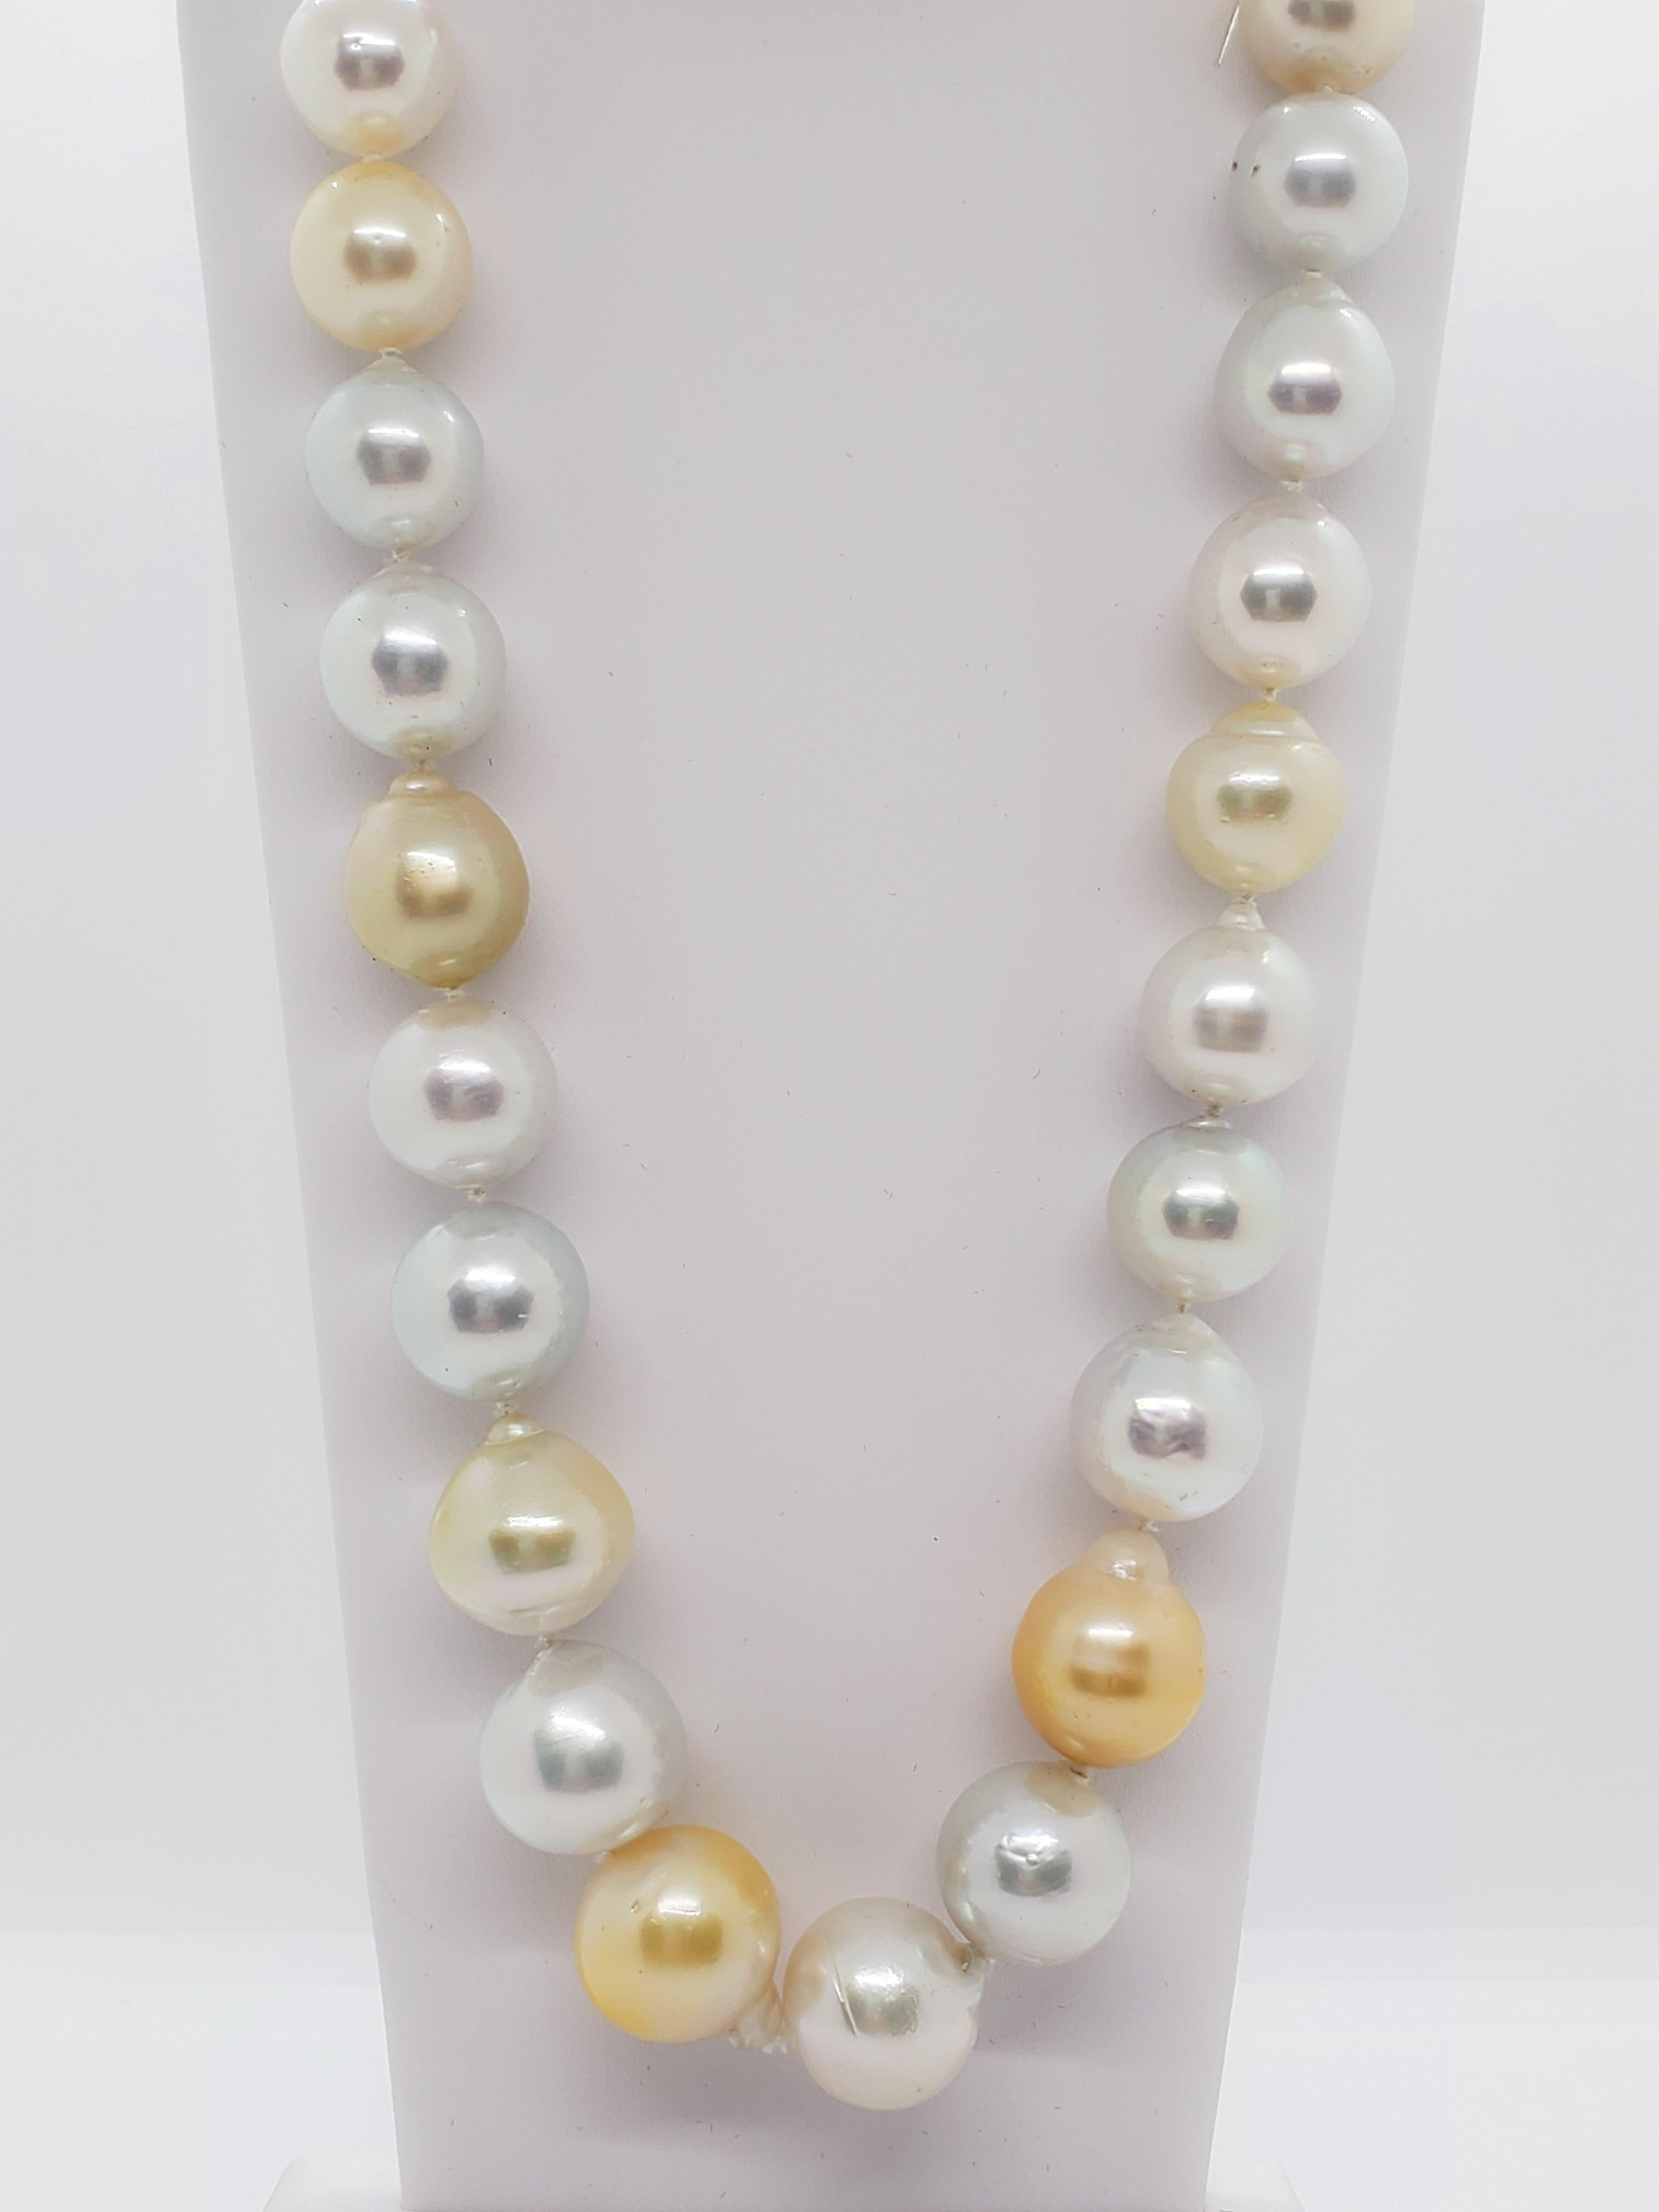  White and Yellow South Sea Pearl Necklace with Diamond Clasp In Excellent Condition For Sale In Los Angeles, CA